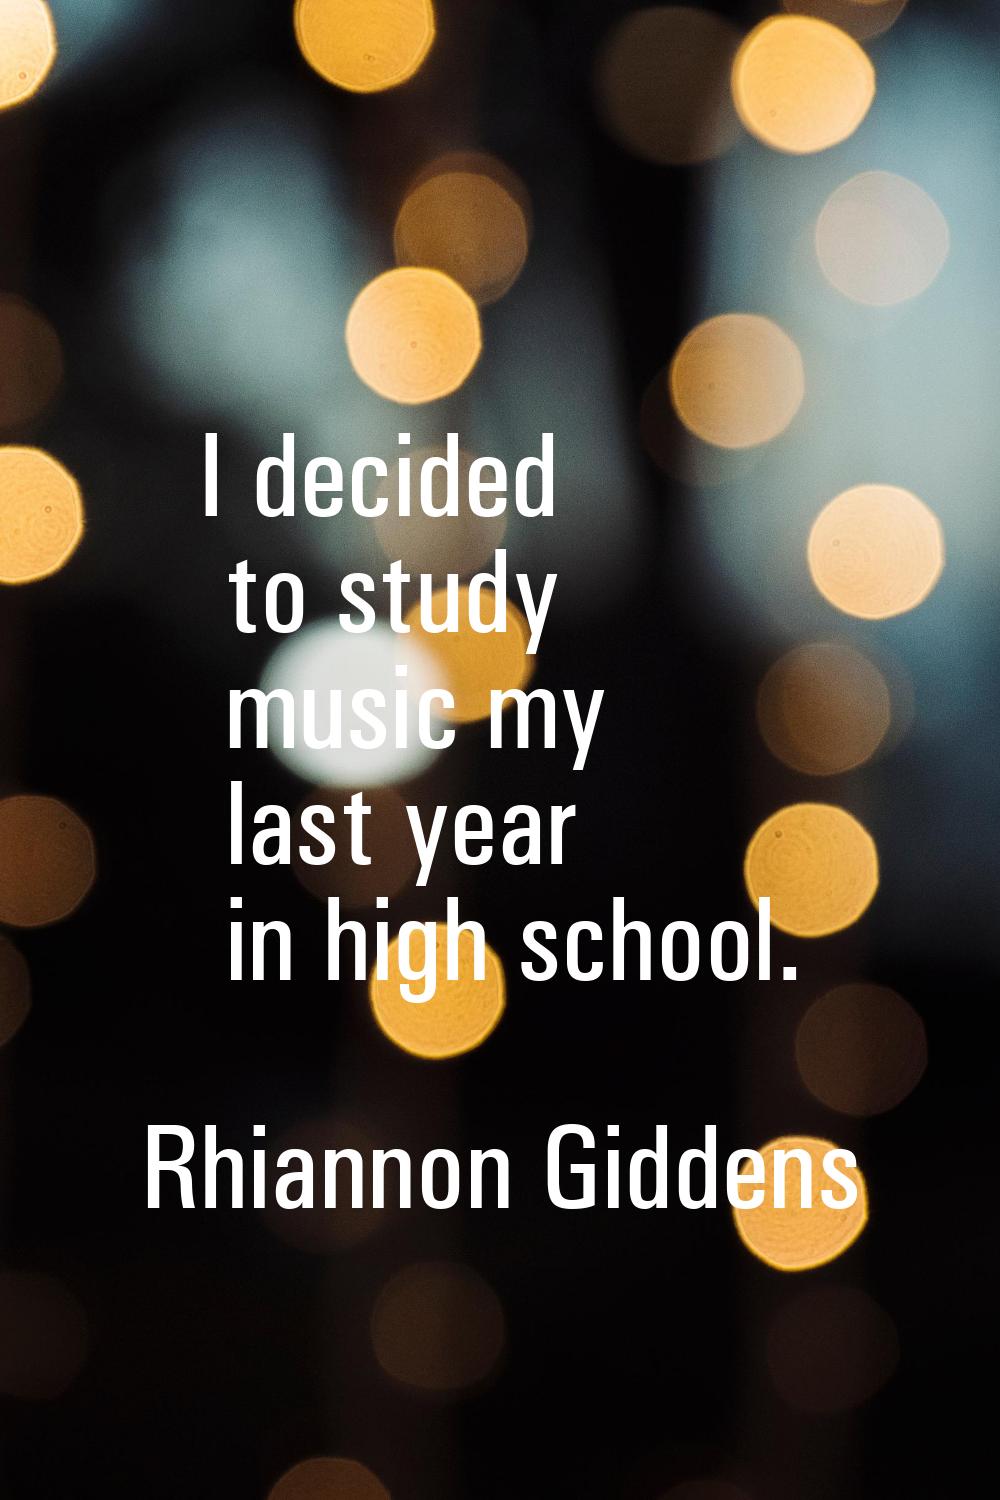 I decided to study music my last year in high school.